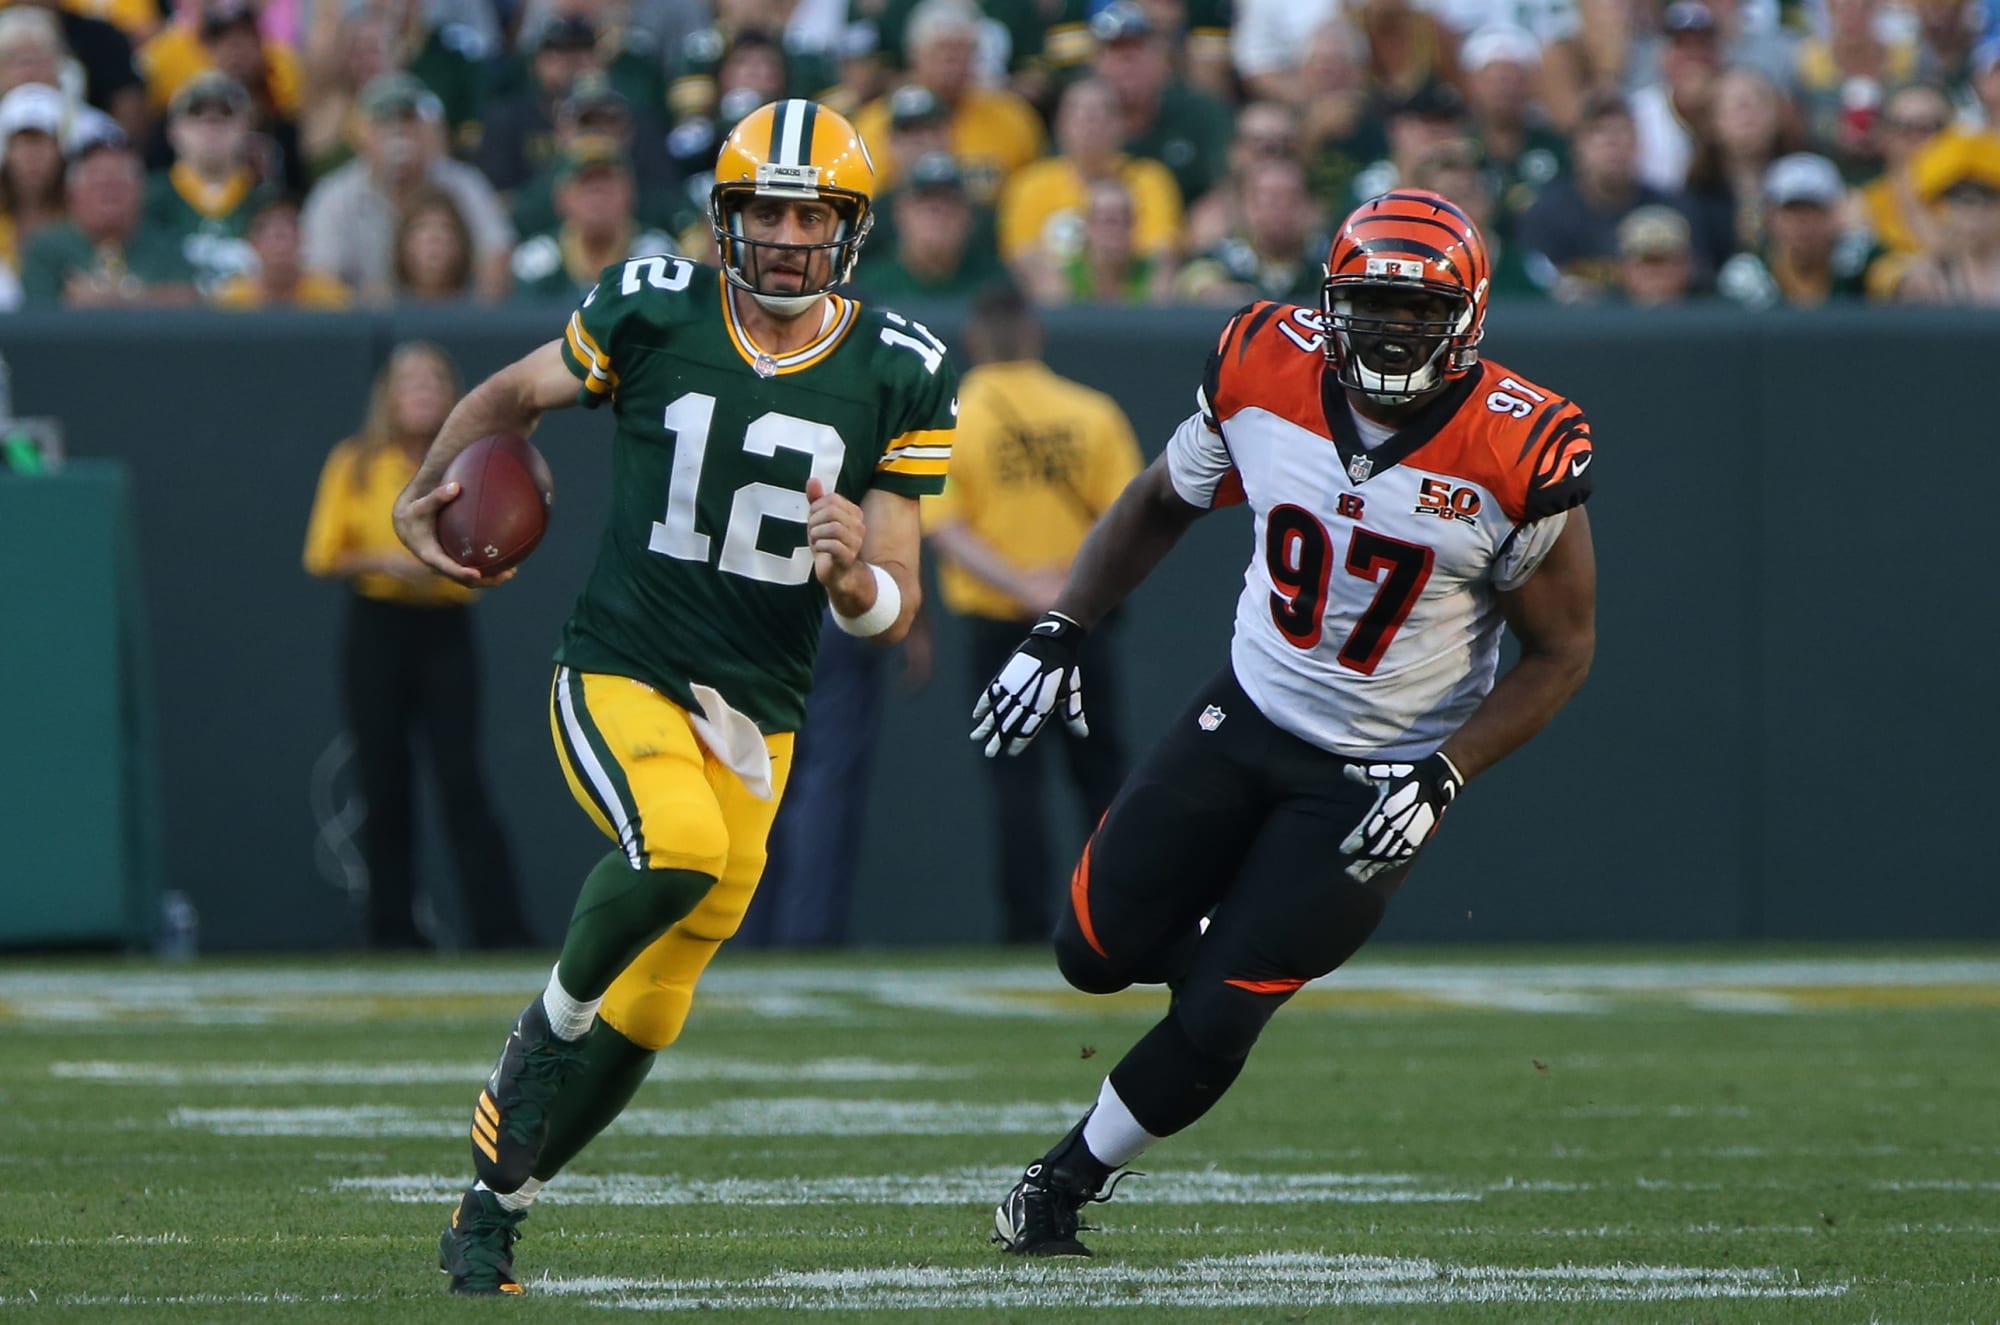 Bengals vs. Packers Highlights, game tracker and more